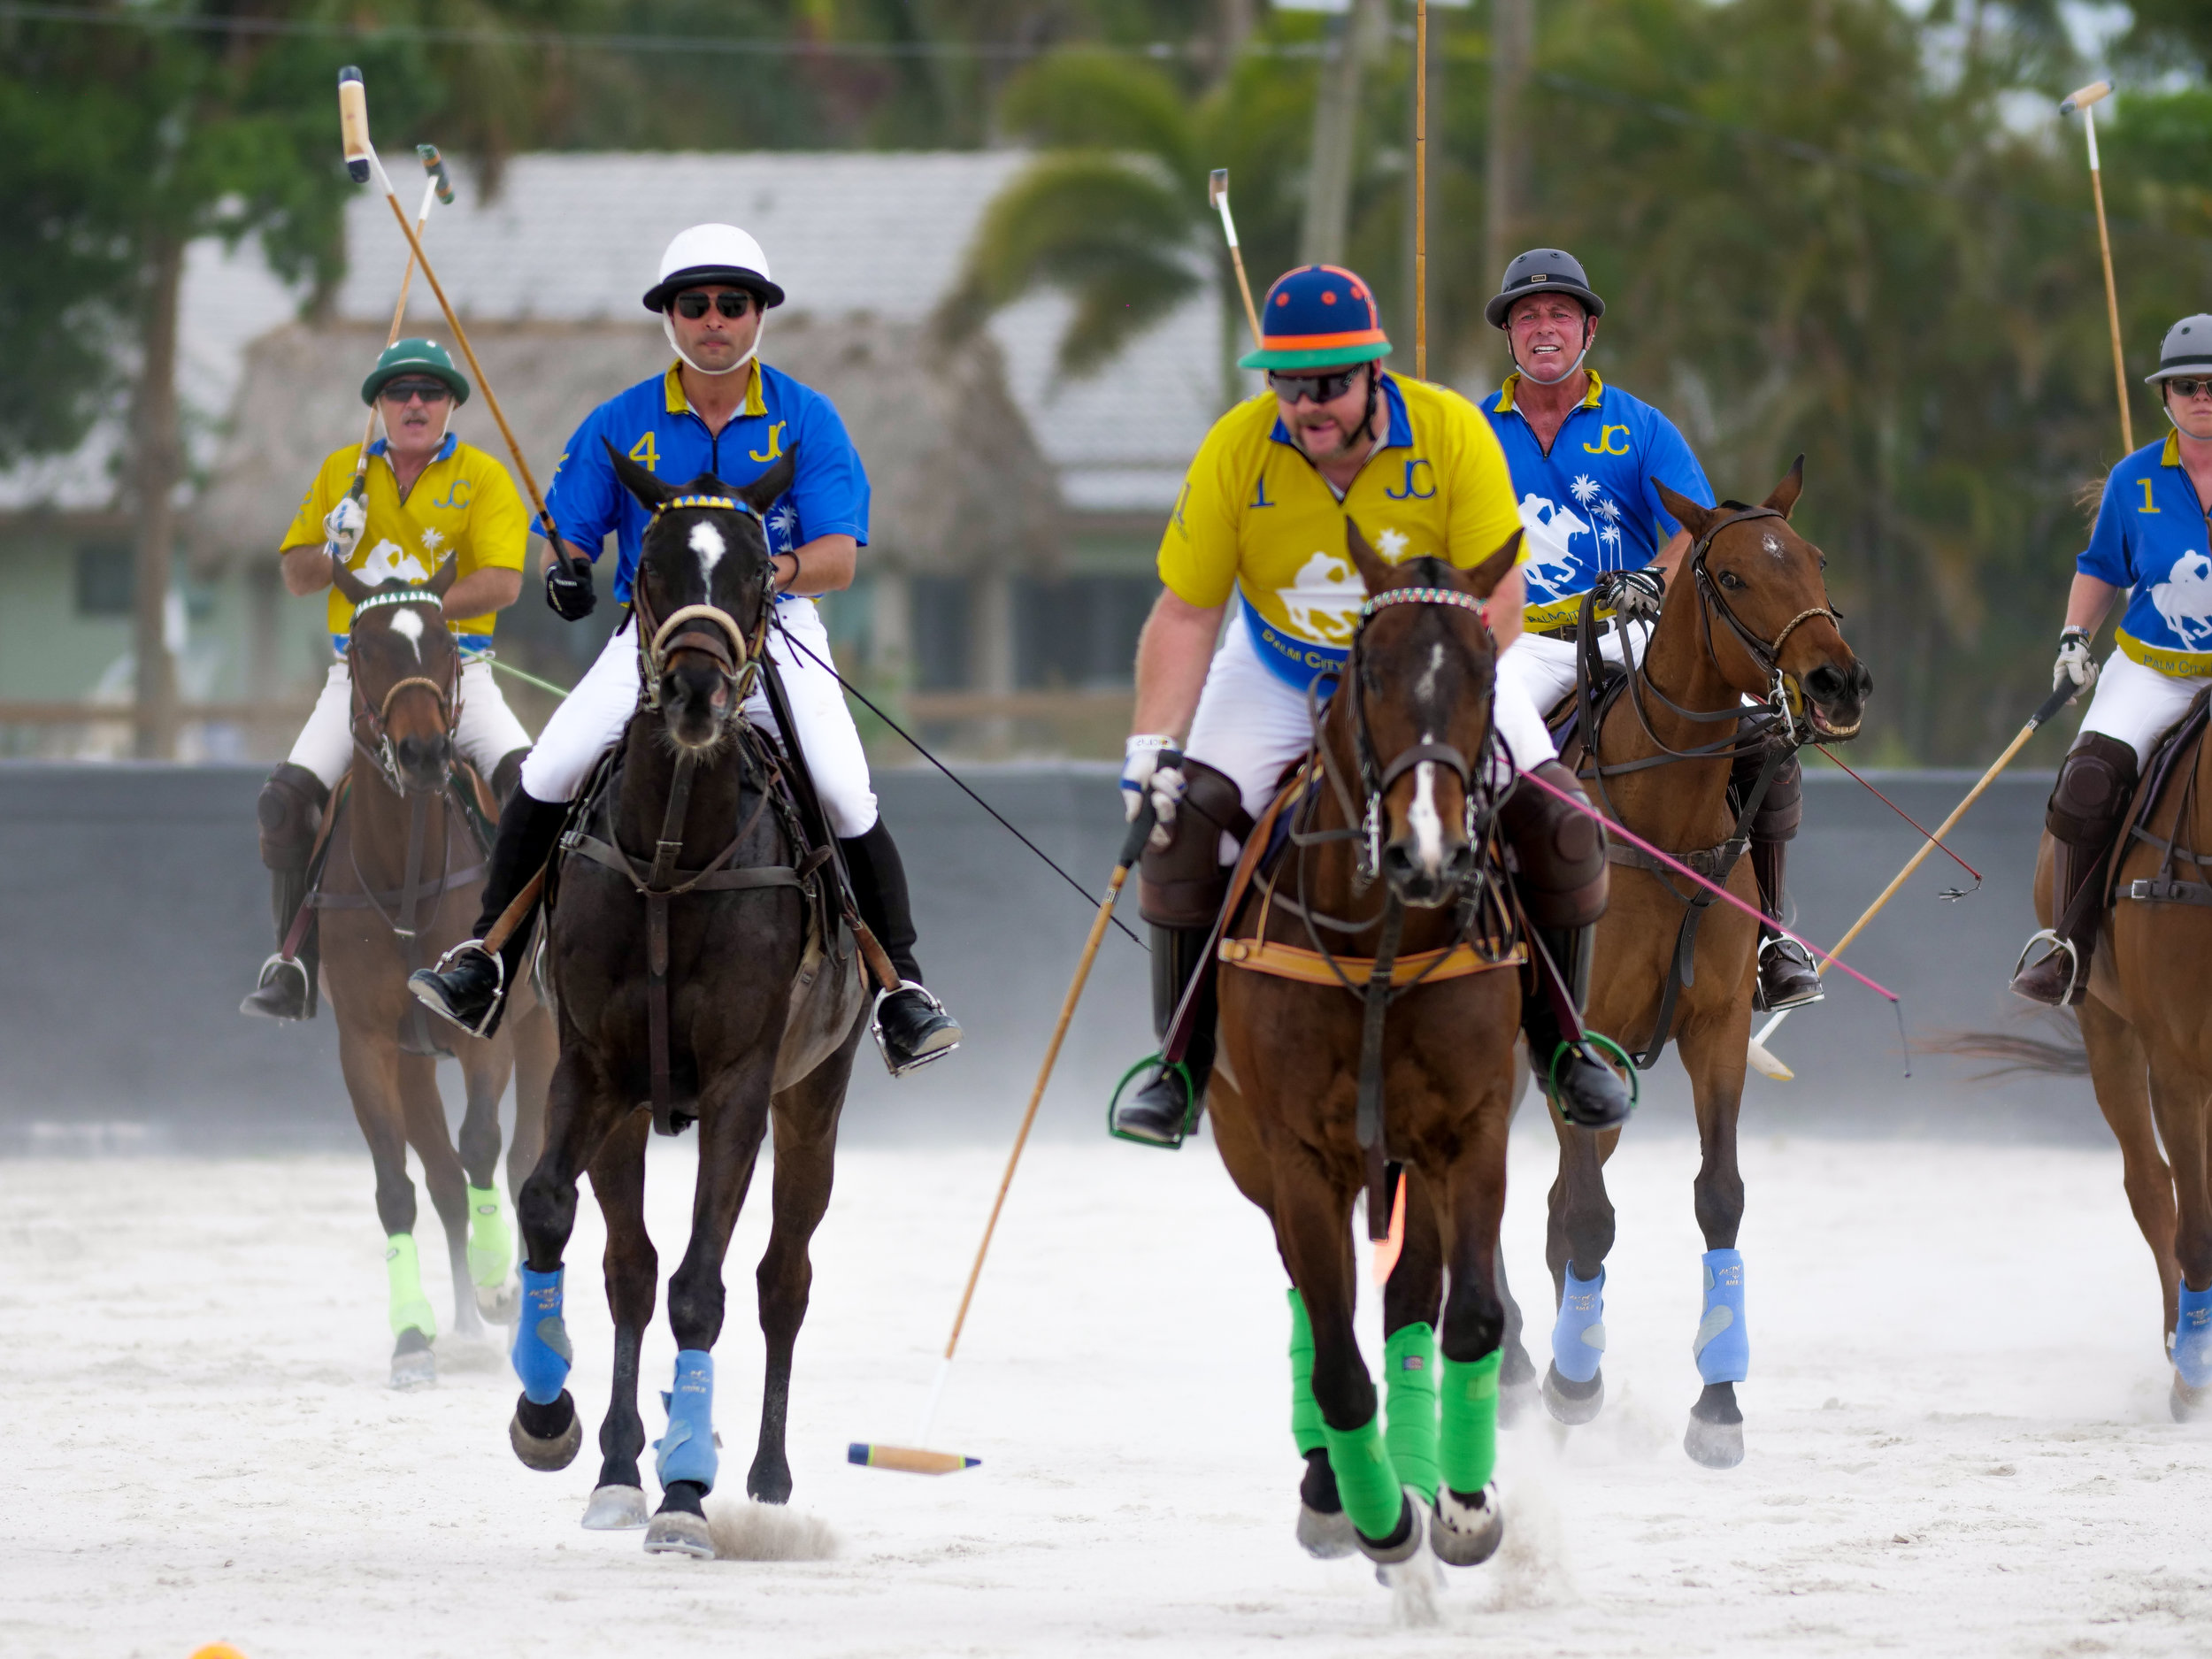 A Polo School team riding on the backs of brown horses.